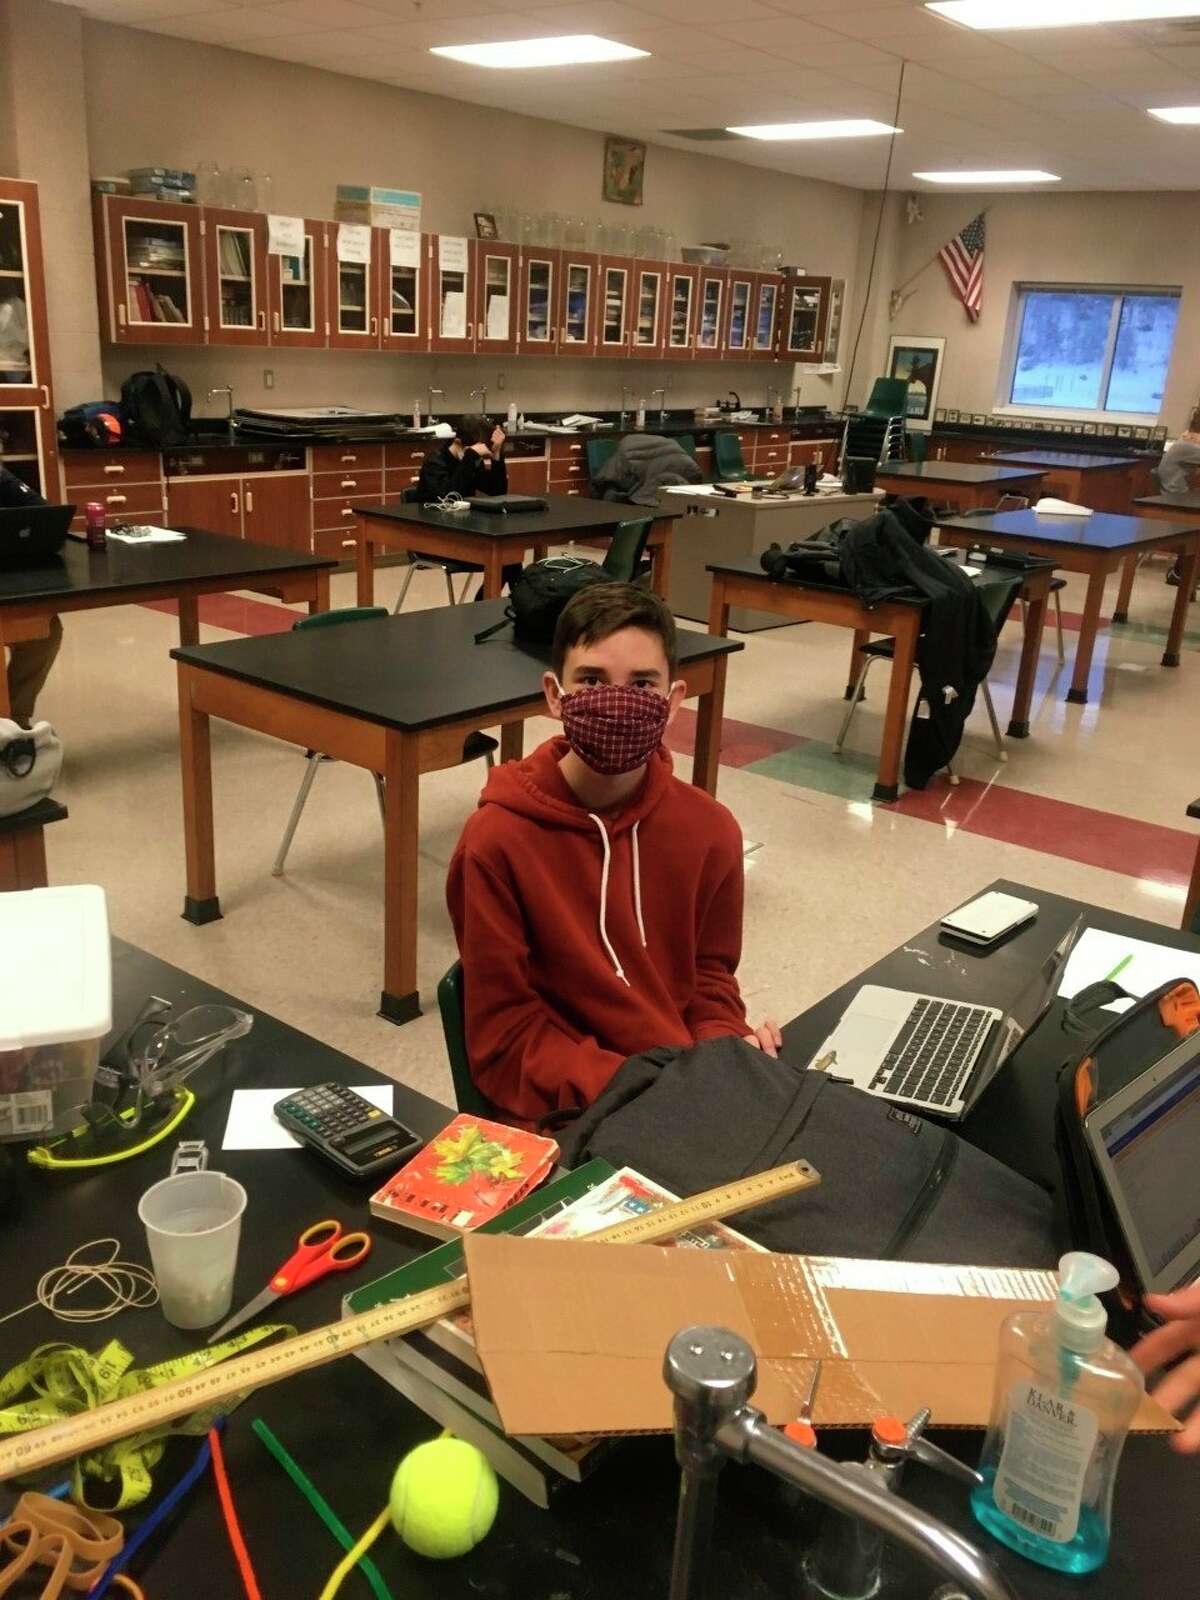 Manistee's Dylan Madsen poses for a photo Saturday during the West Ottawa Science Olympiad tournament. Manistee High School had two teams competing remotely. (Courtesy photo)